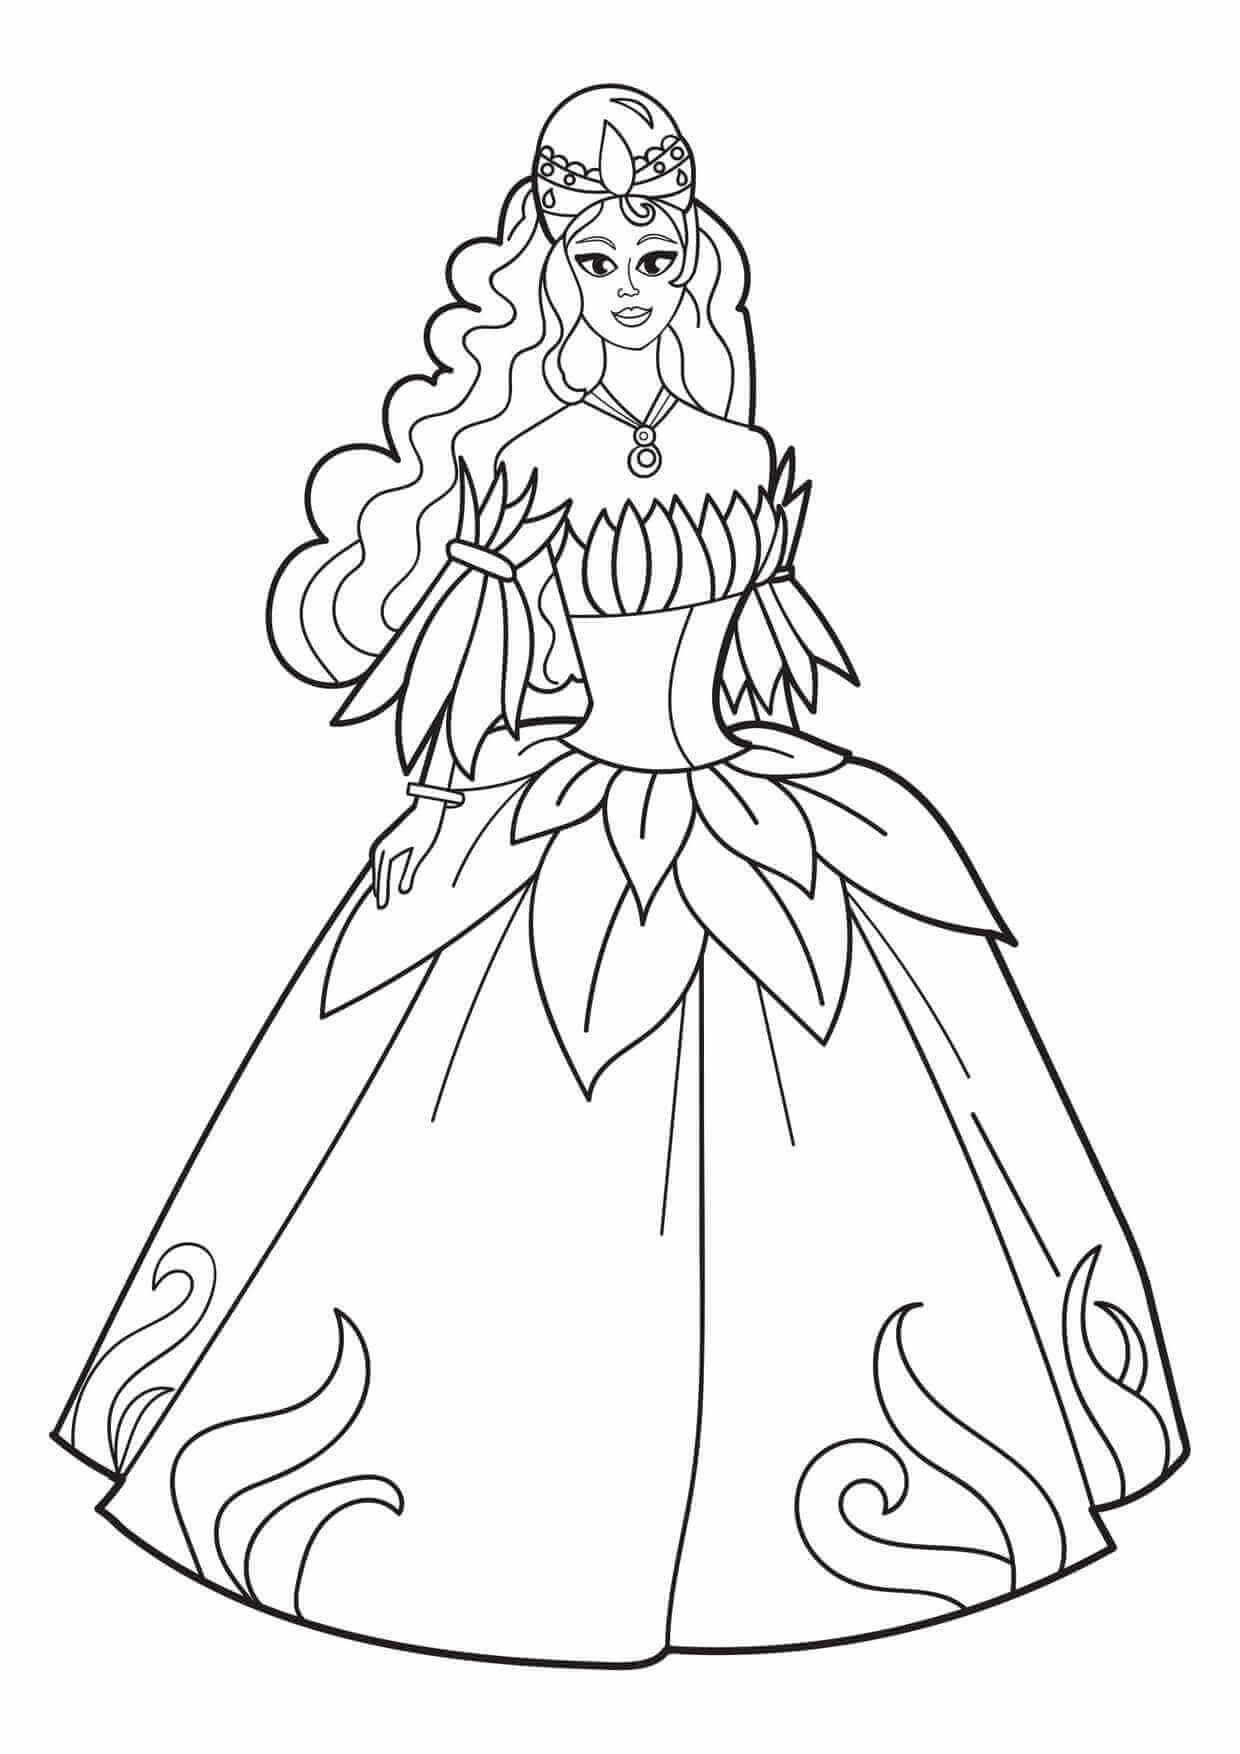 Coloring Images Of Girls Coloring Pages